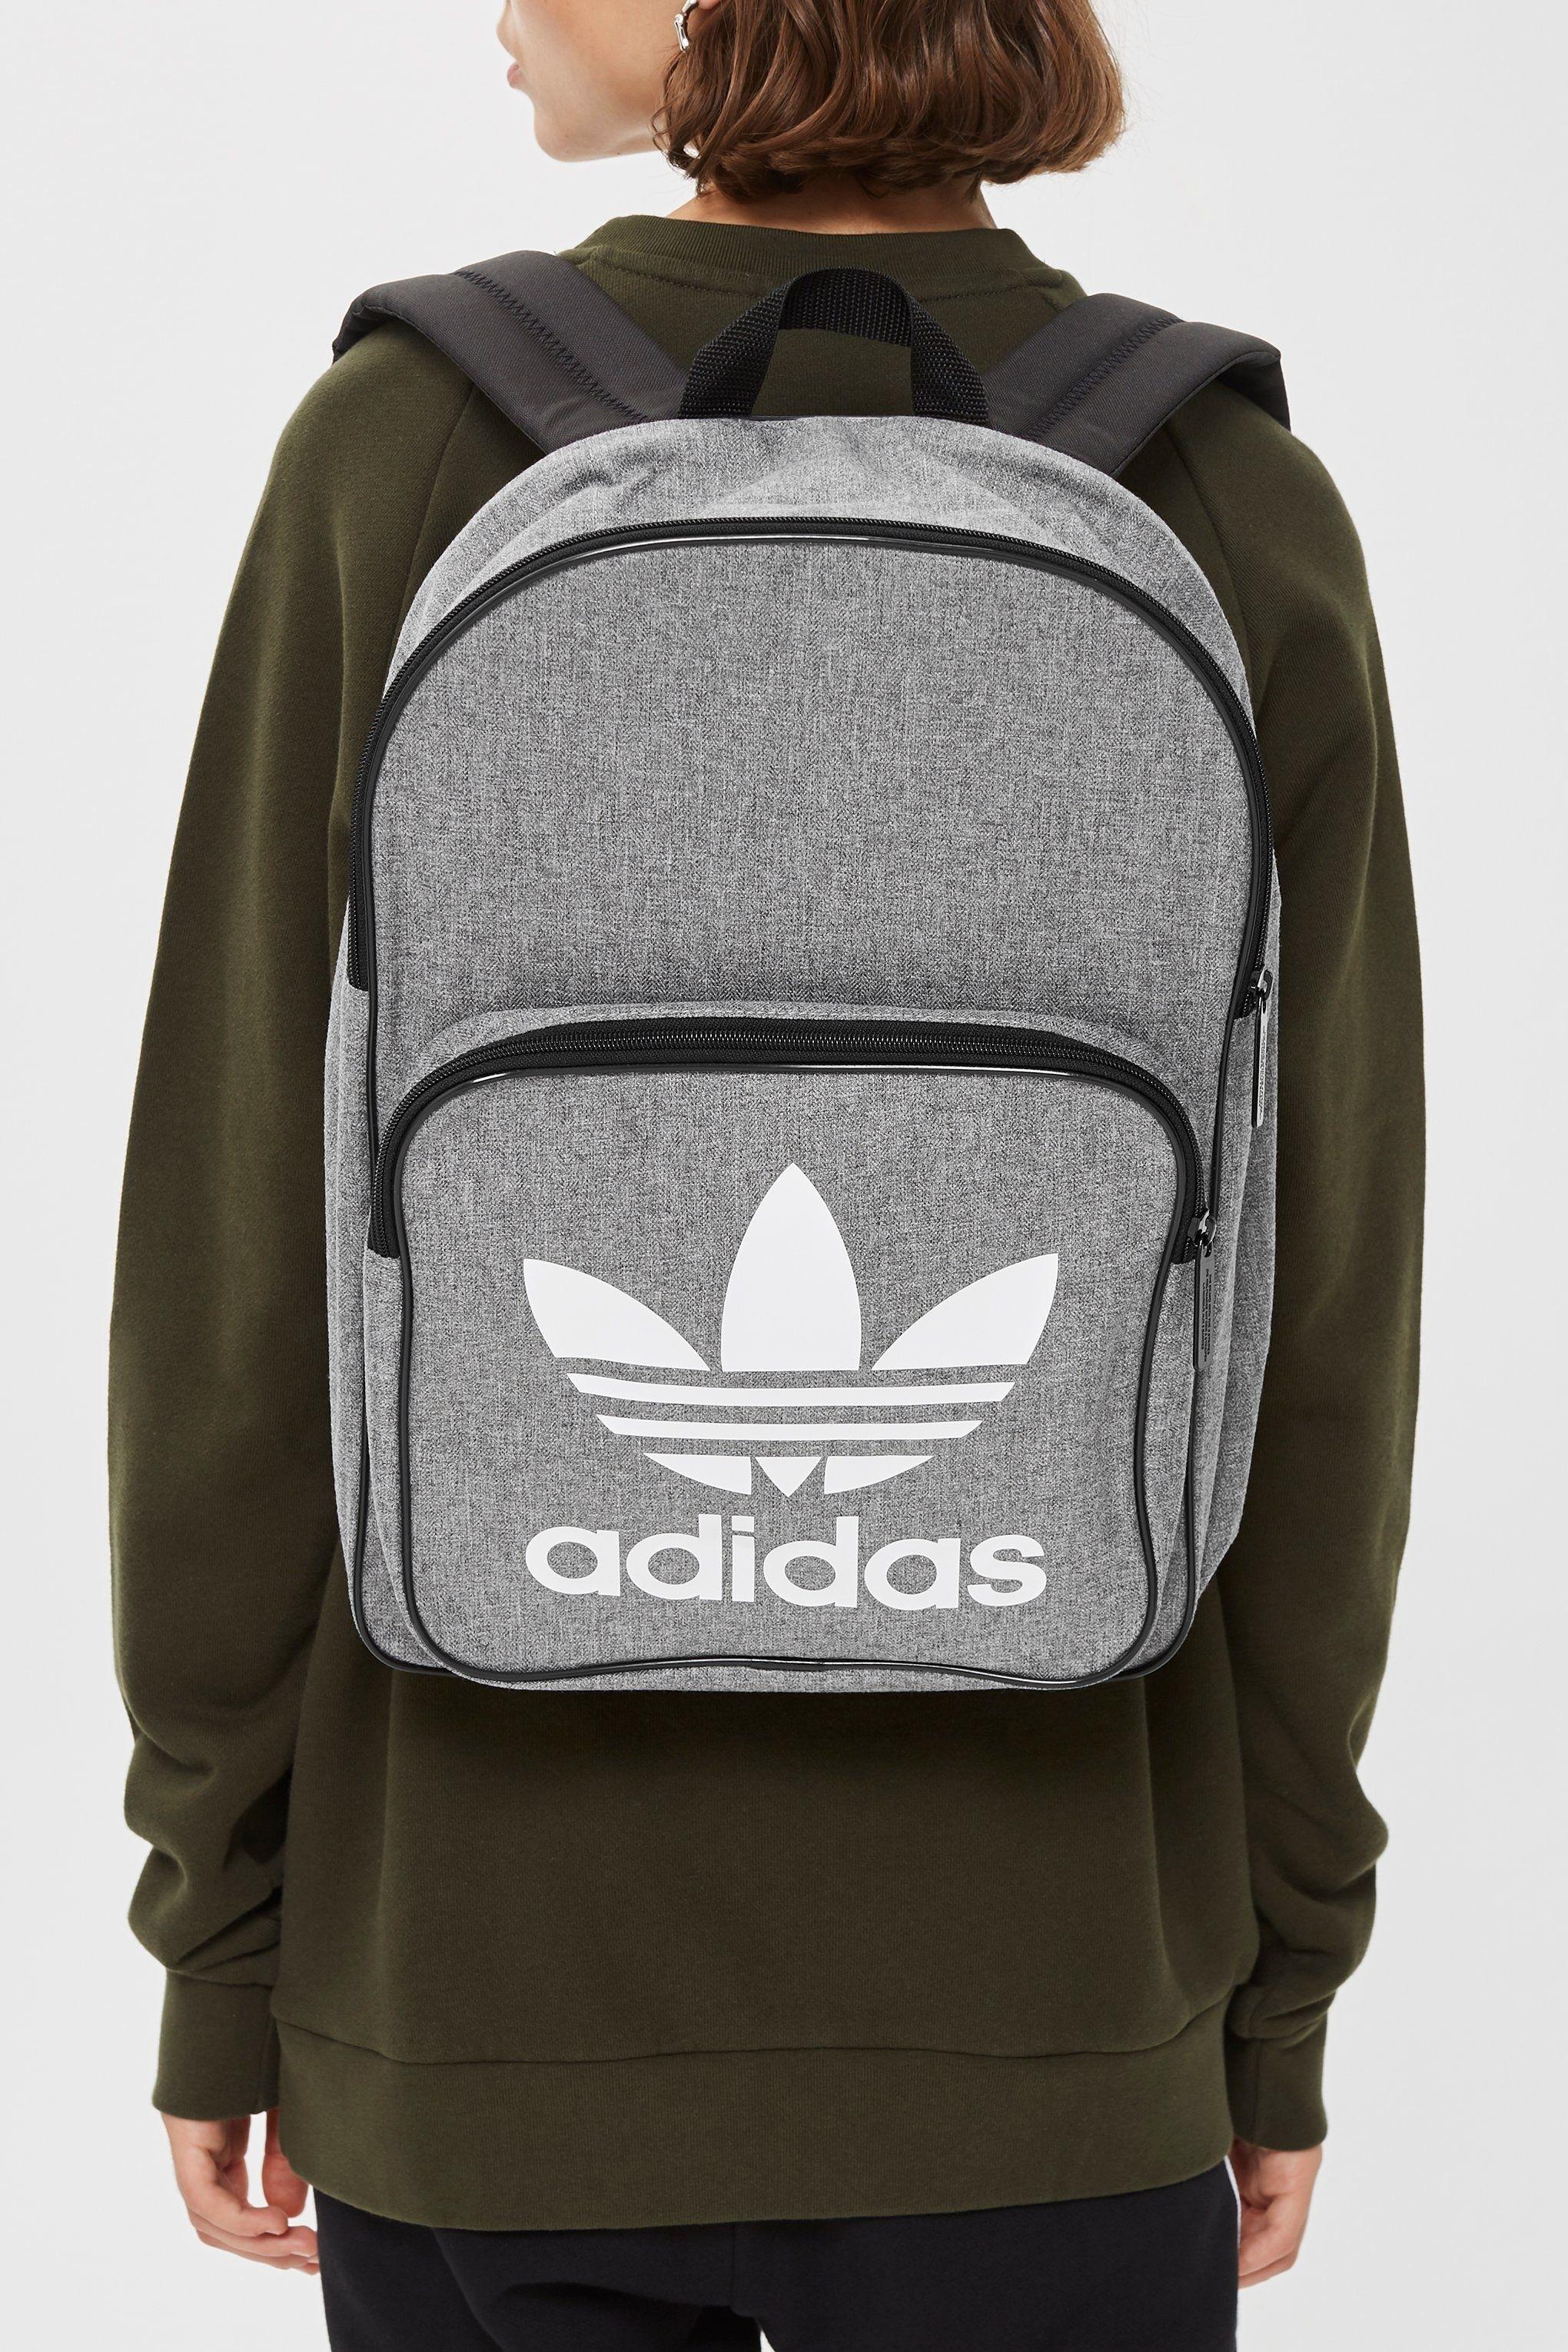 Adidas Accessories Logo - Logo Backpack by adidas & Accessories- Topshop